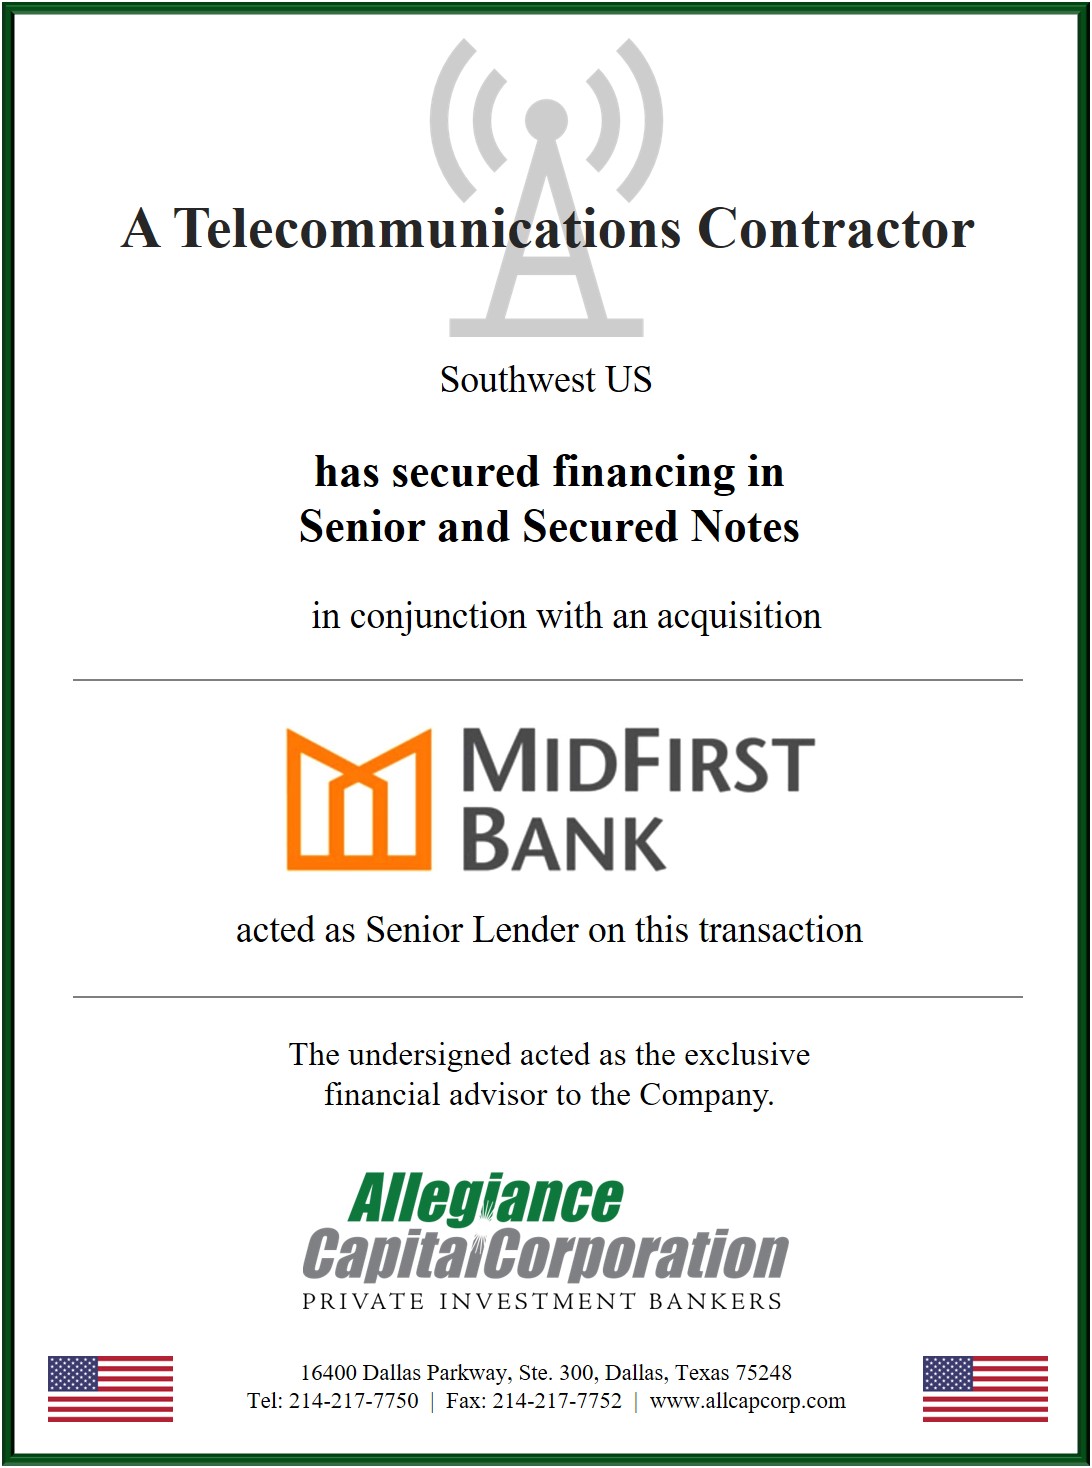 Telecom Contractor secured financing from MidFirst Bank-1